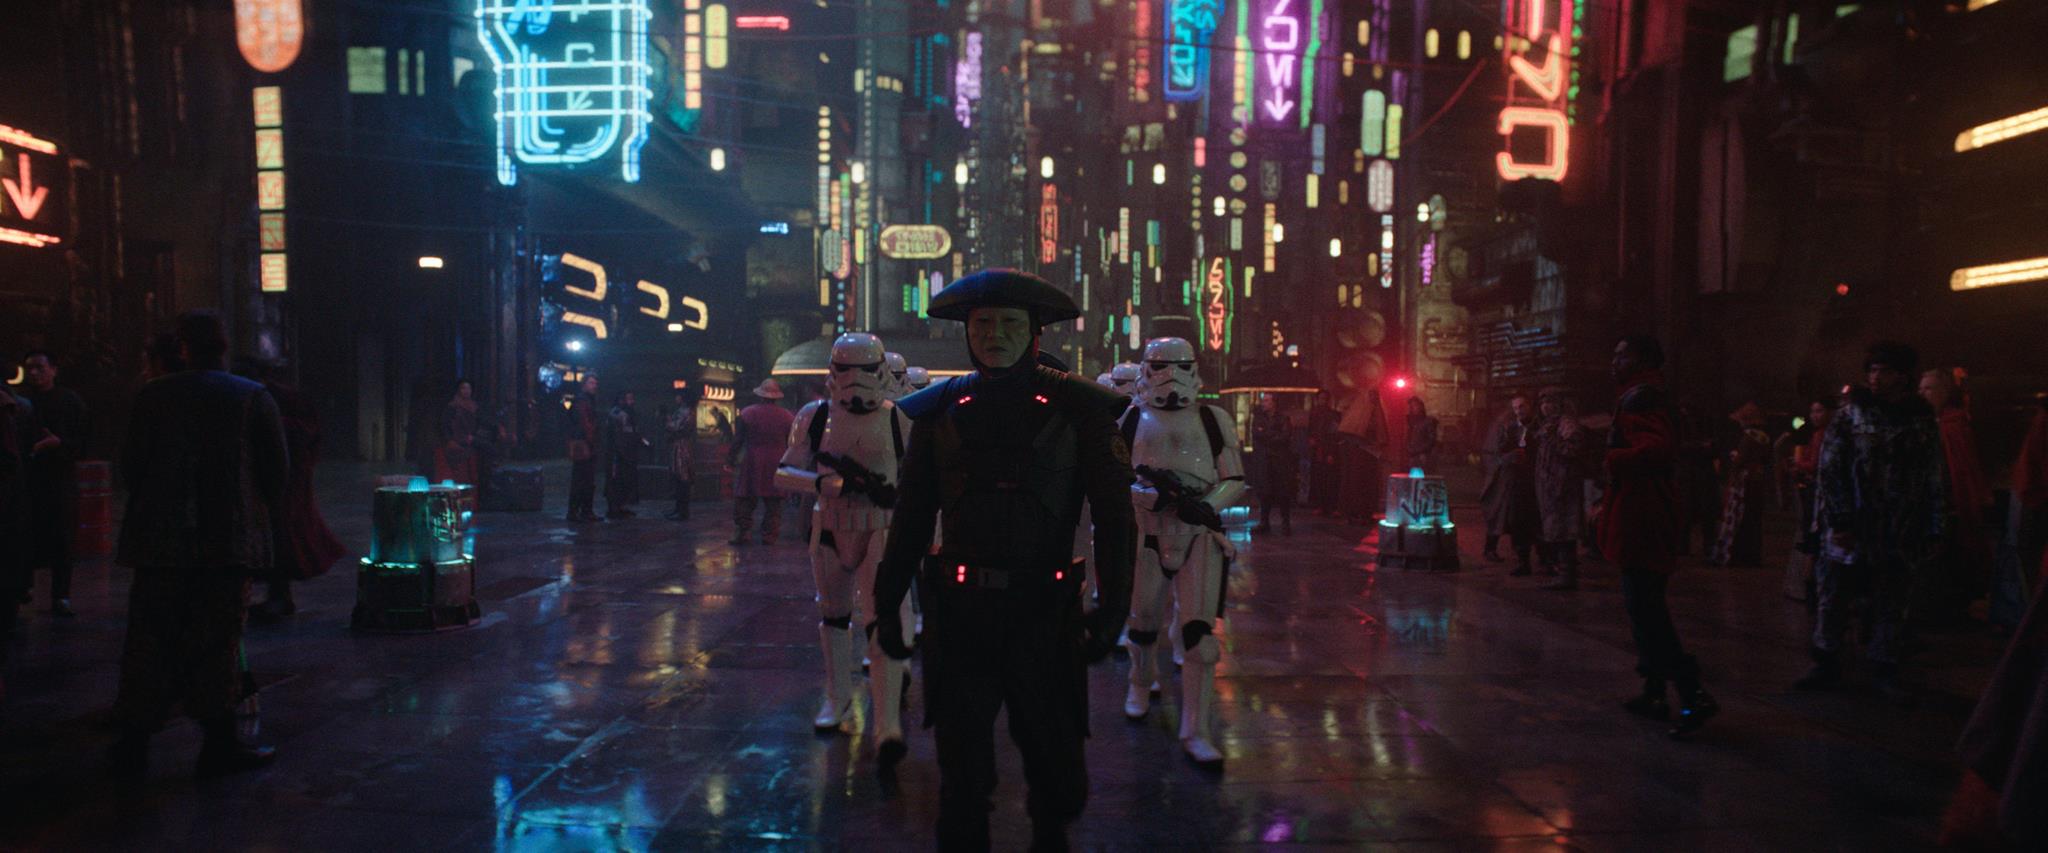 Fifth Brother (Sung Kang) and Stormtroopers in Lucasfilm's OBI-WAN KENOBI, exclusively on Disney+. © 2022 Lucasfilm Ltd. & ™. All Rights Reserved.